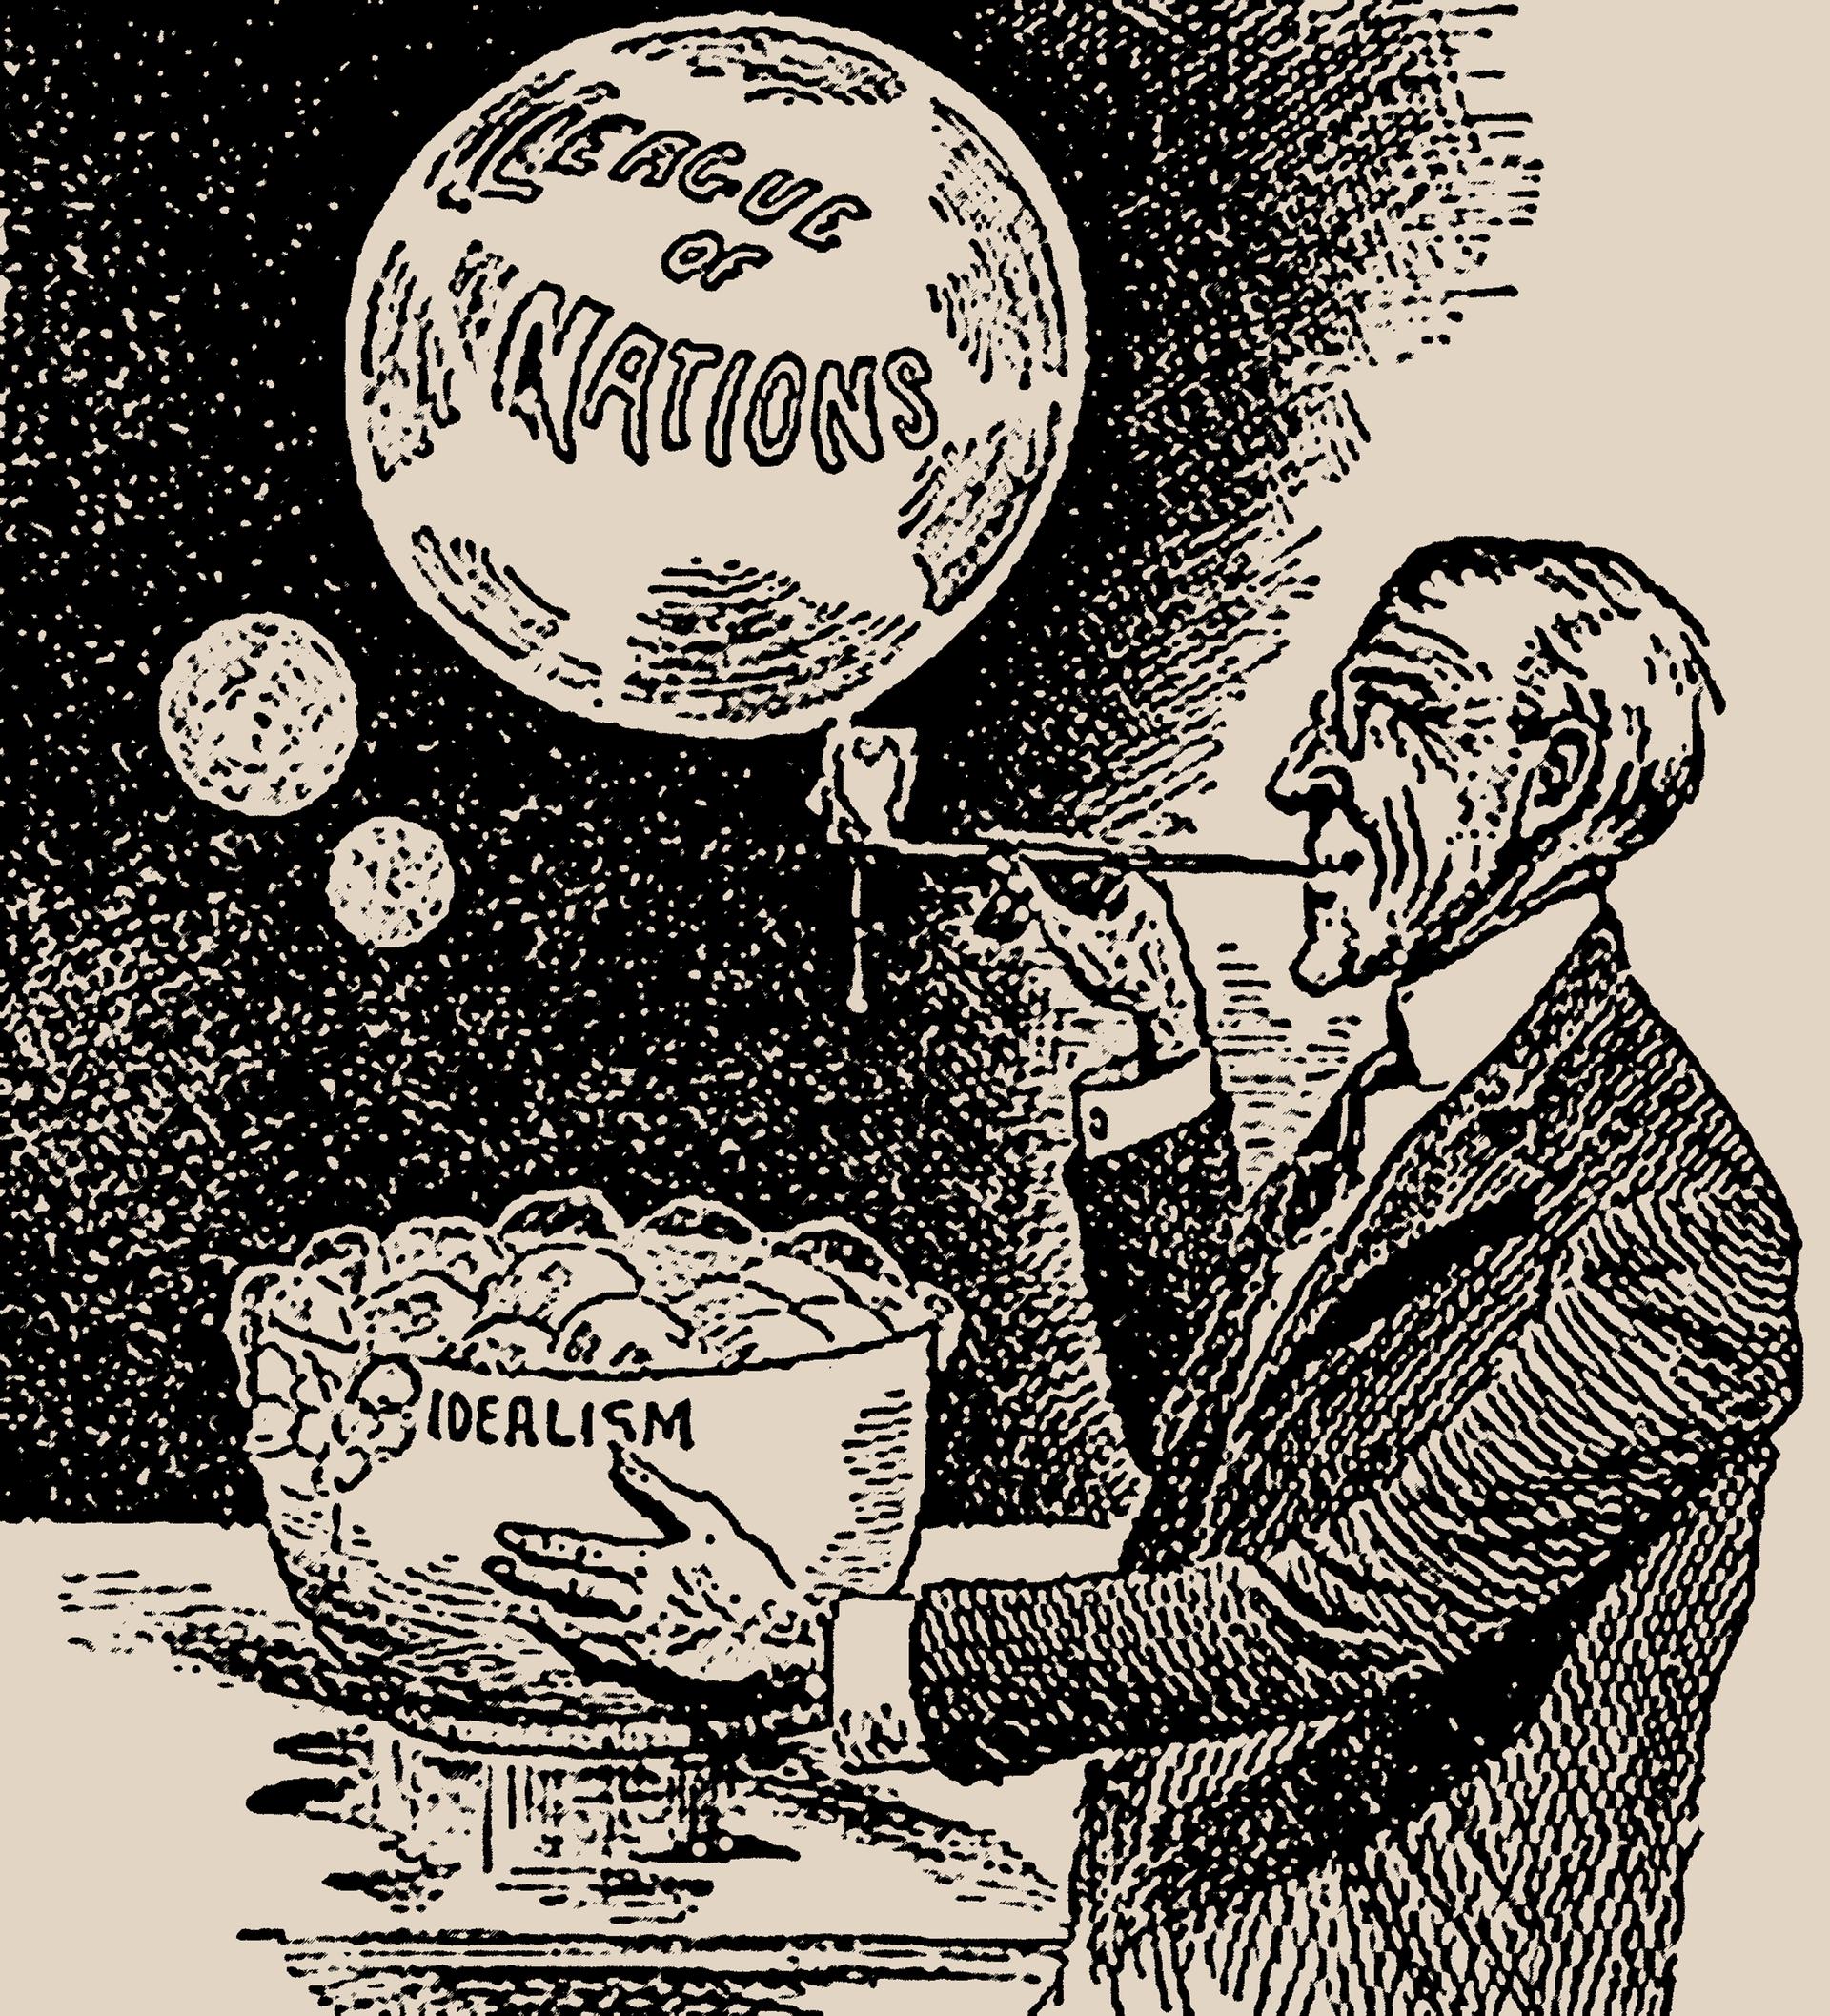 A cartoonist depiction of a man (Woodrow Wilson) blowing a bubble labeled 